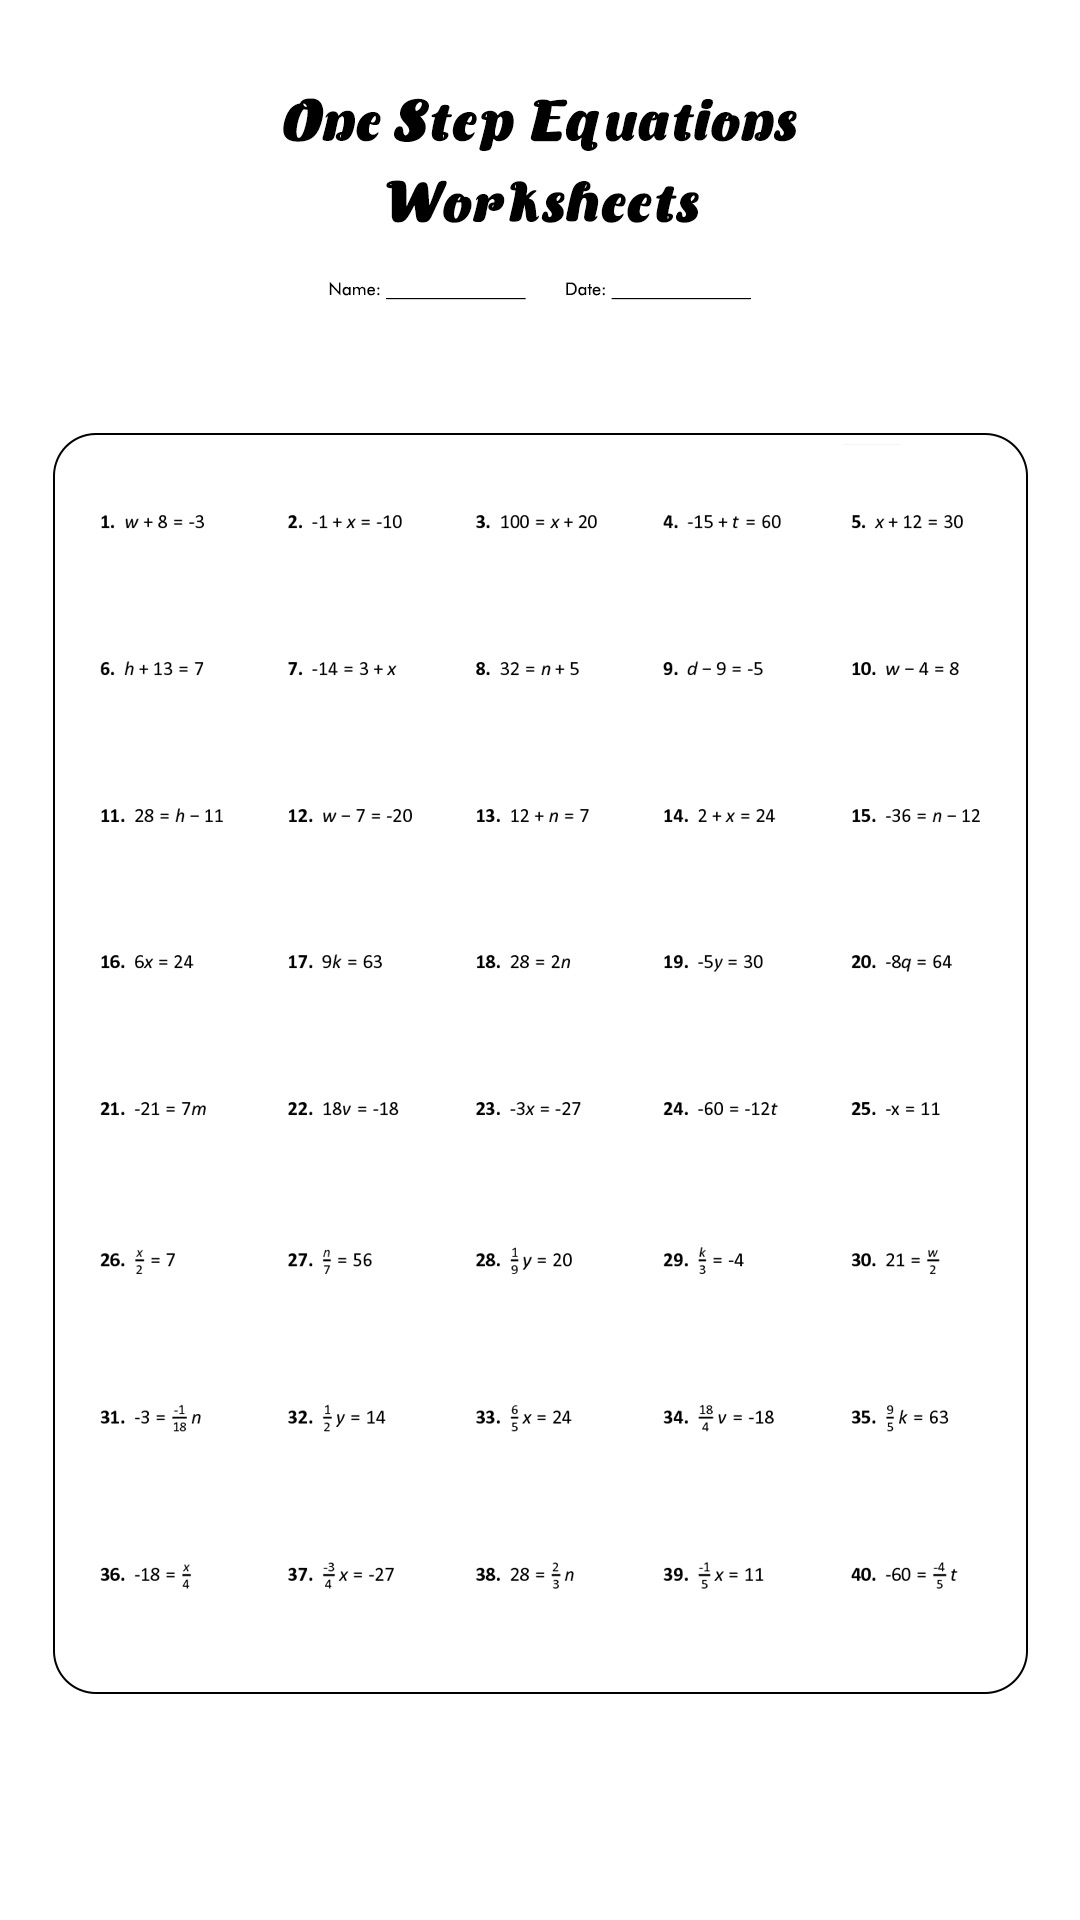 One Step Equations Worksheets Image